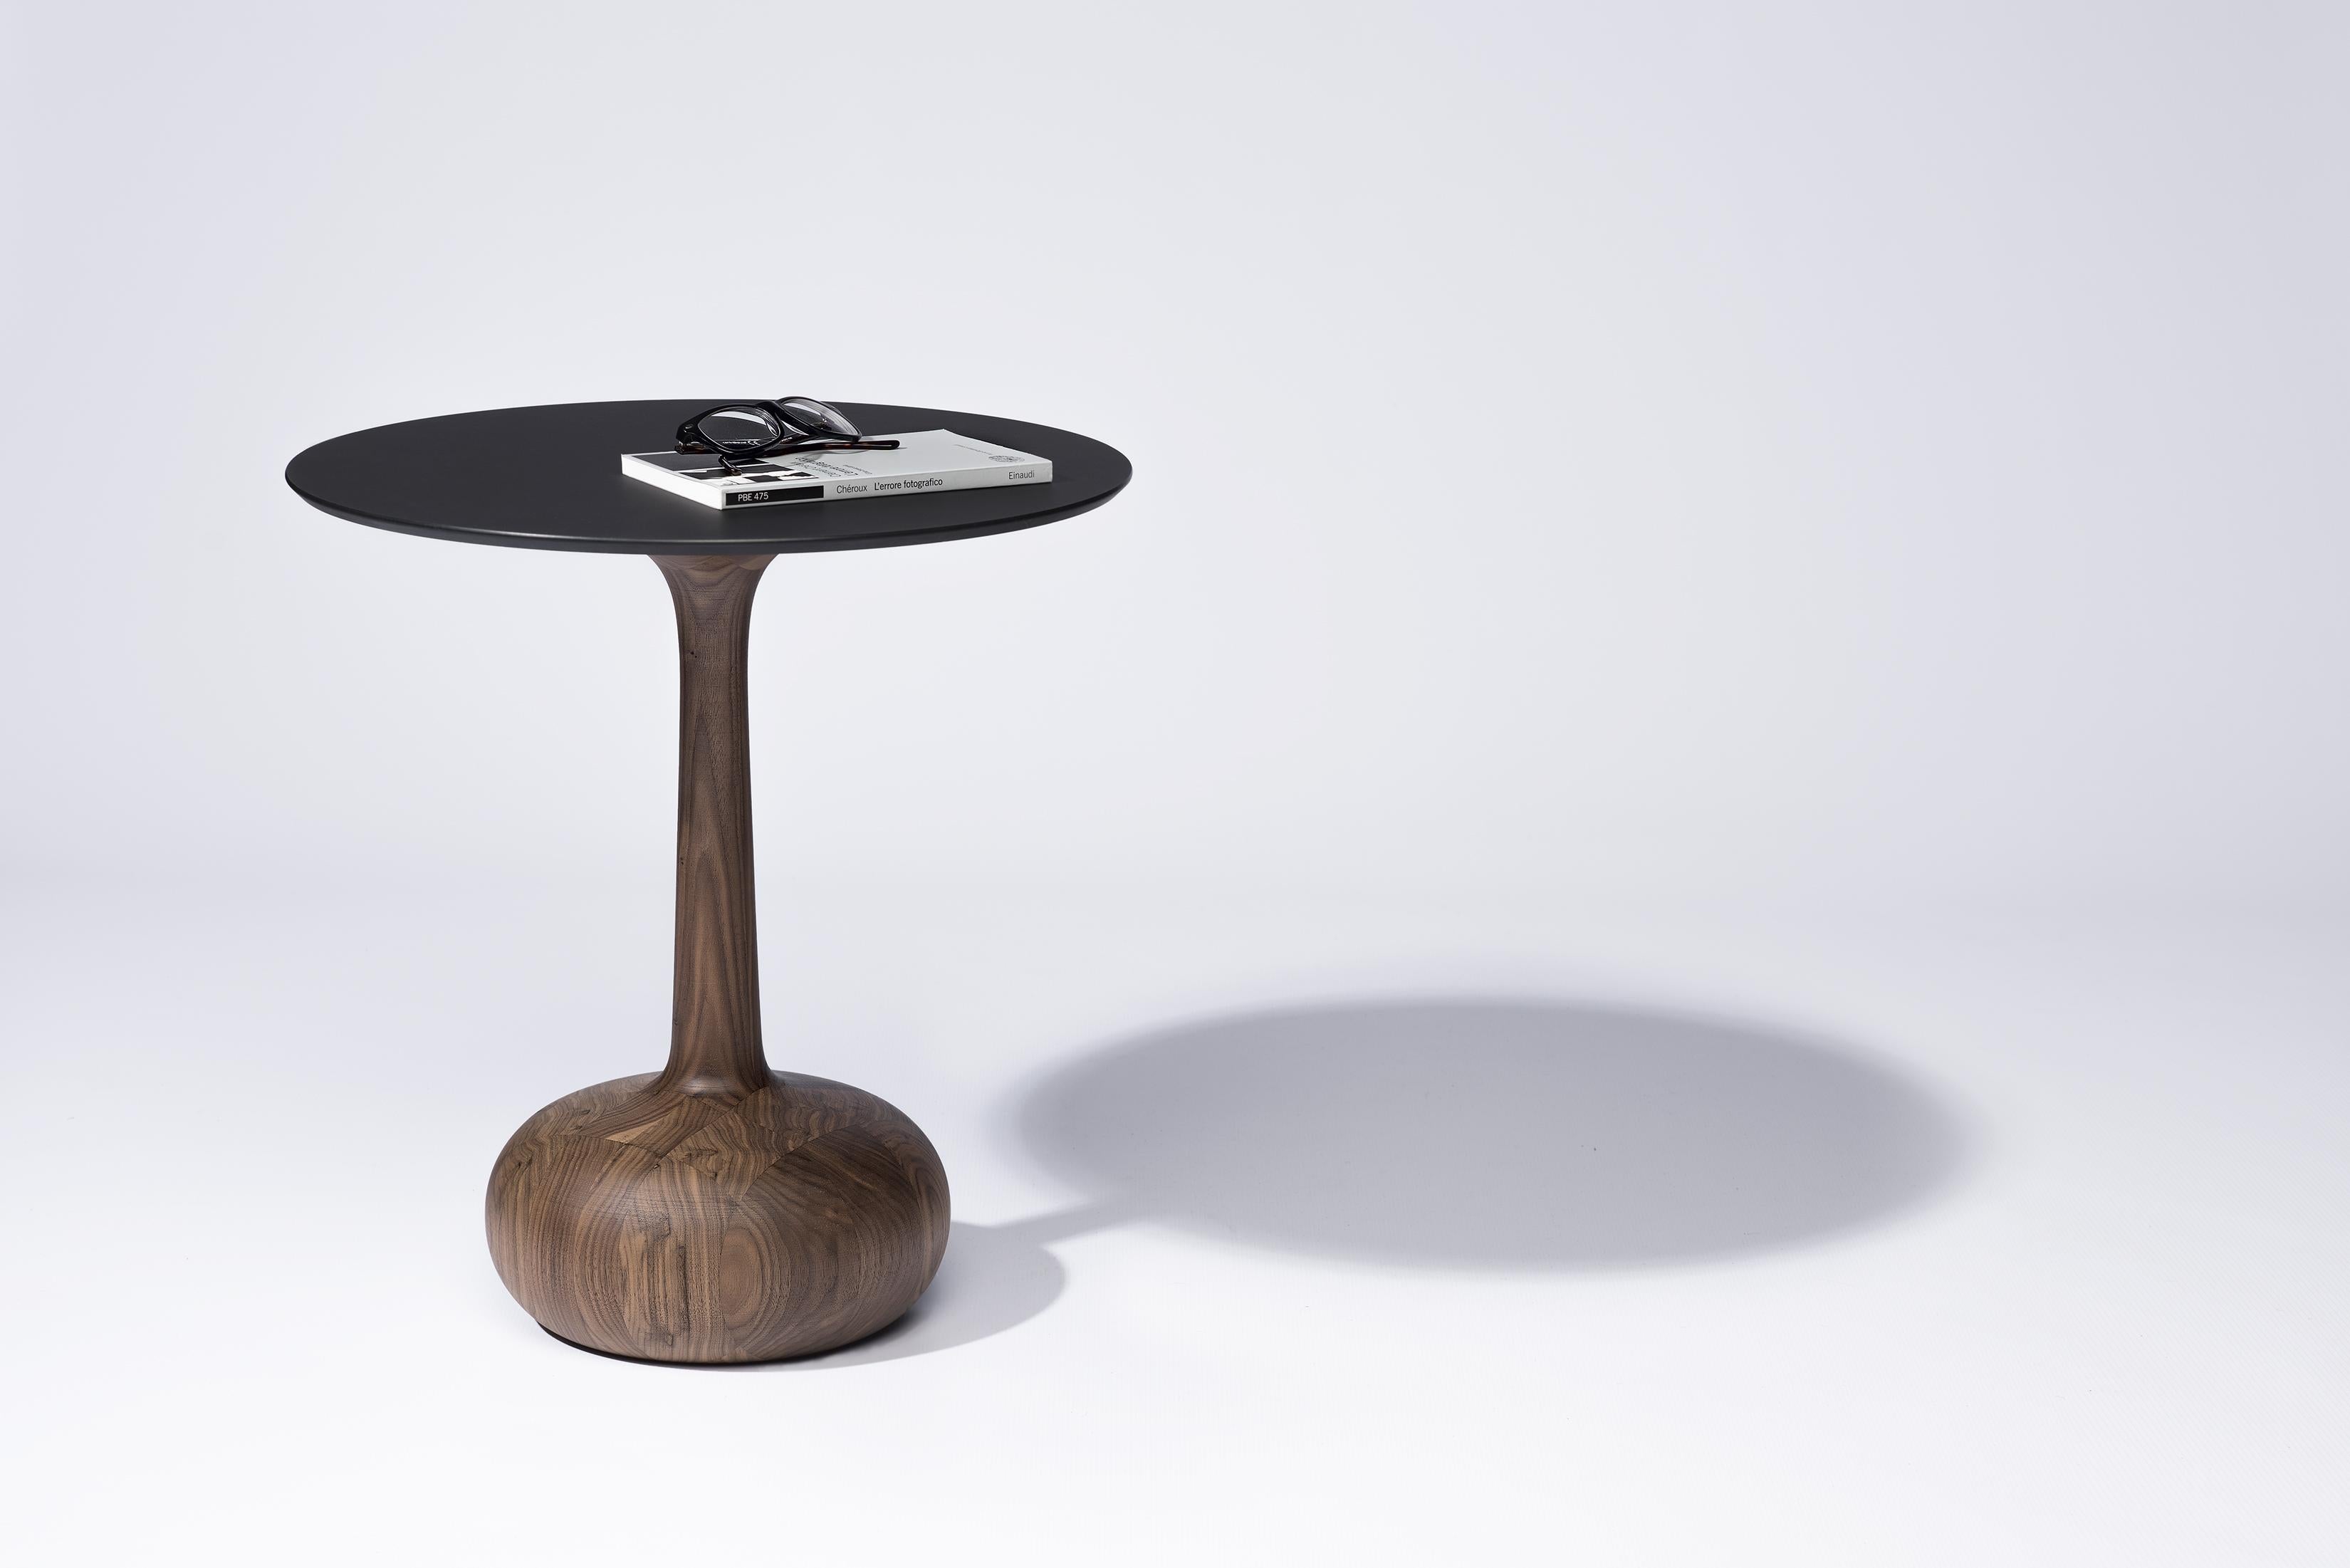 Ginevra

The expression of the finest Italian excellences

The coffee table has a base handcrafted of canaletto walnut and a round top of FENIX NTM®, a high-tech material treated with acrylic resins. The minimal design, with its bulky base,